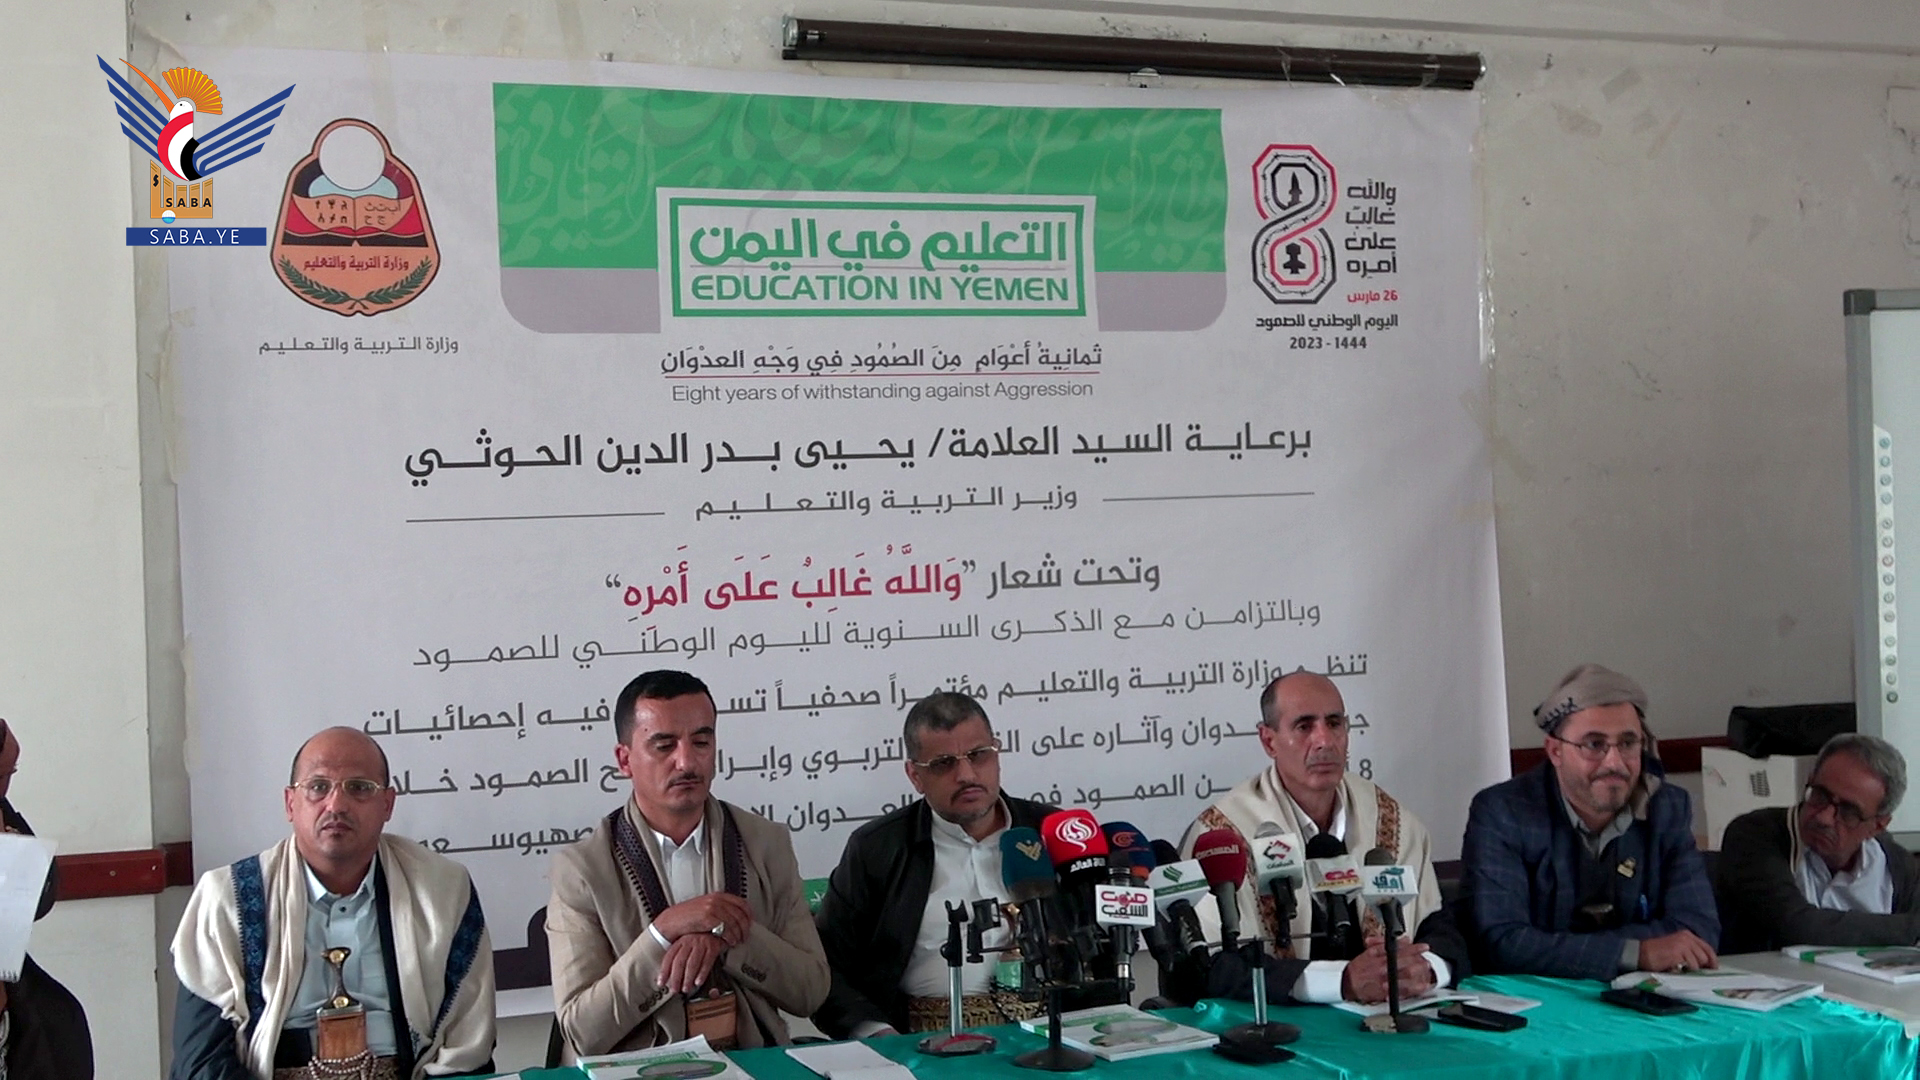 Education in Yemen has eight years of steadfastness in aggression face 